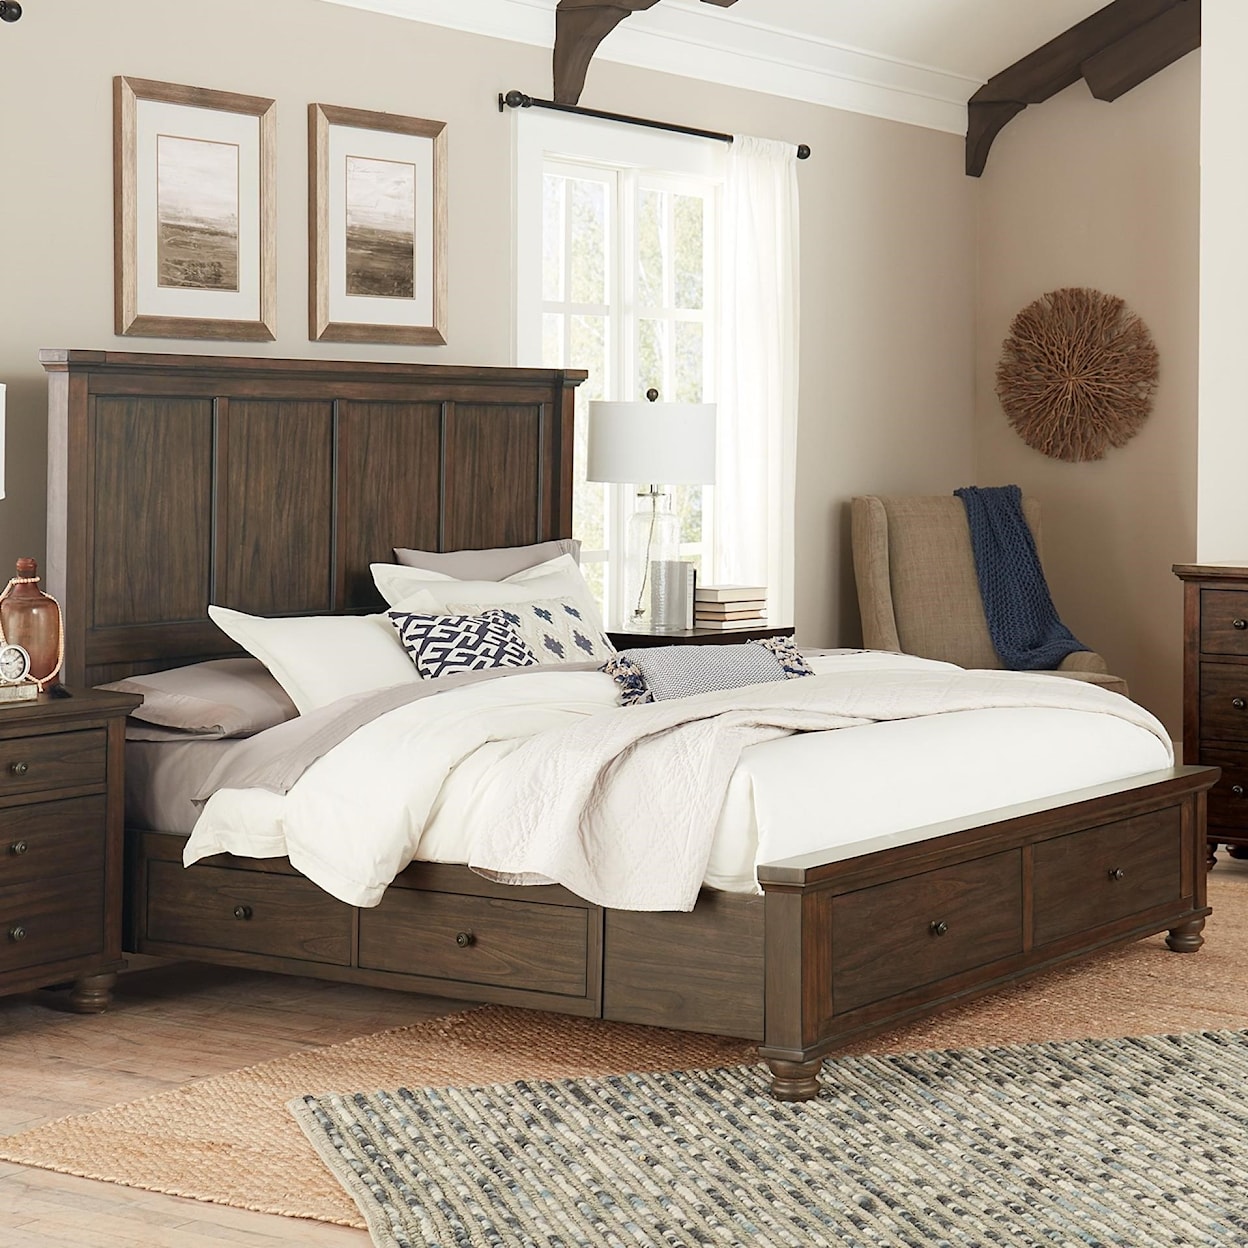 Aspenhome Hudson Valley Cal King Storage Panel Bed